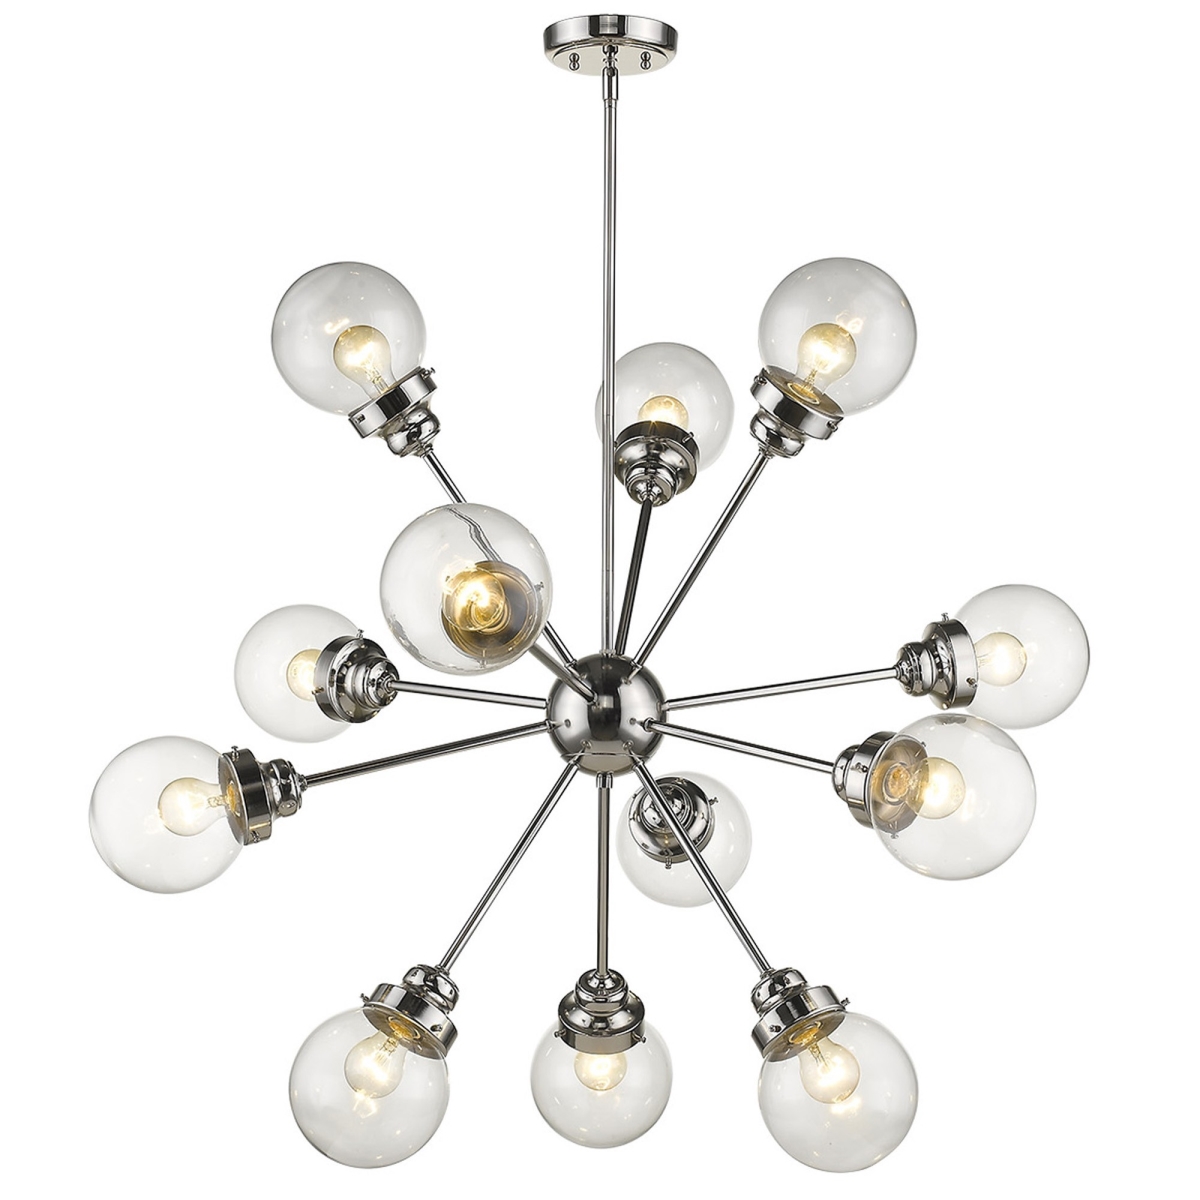 Picture of HomeRoots 398214 40 x 40 x 40 in. Portsmith 12-Light Polished Nickel Chandelier